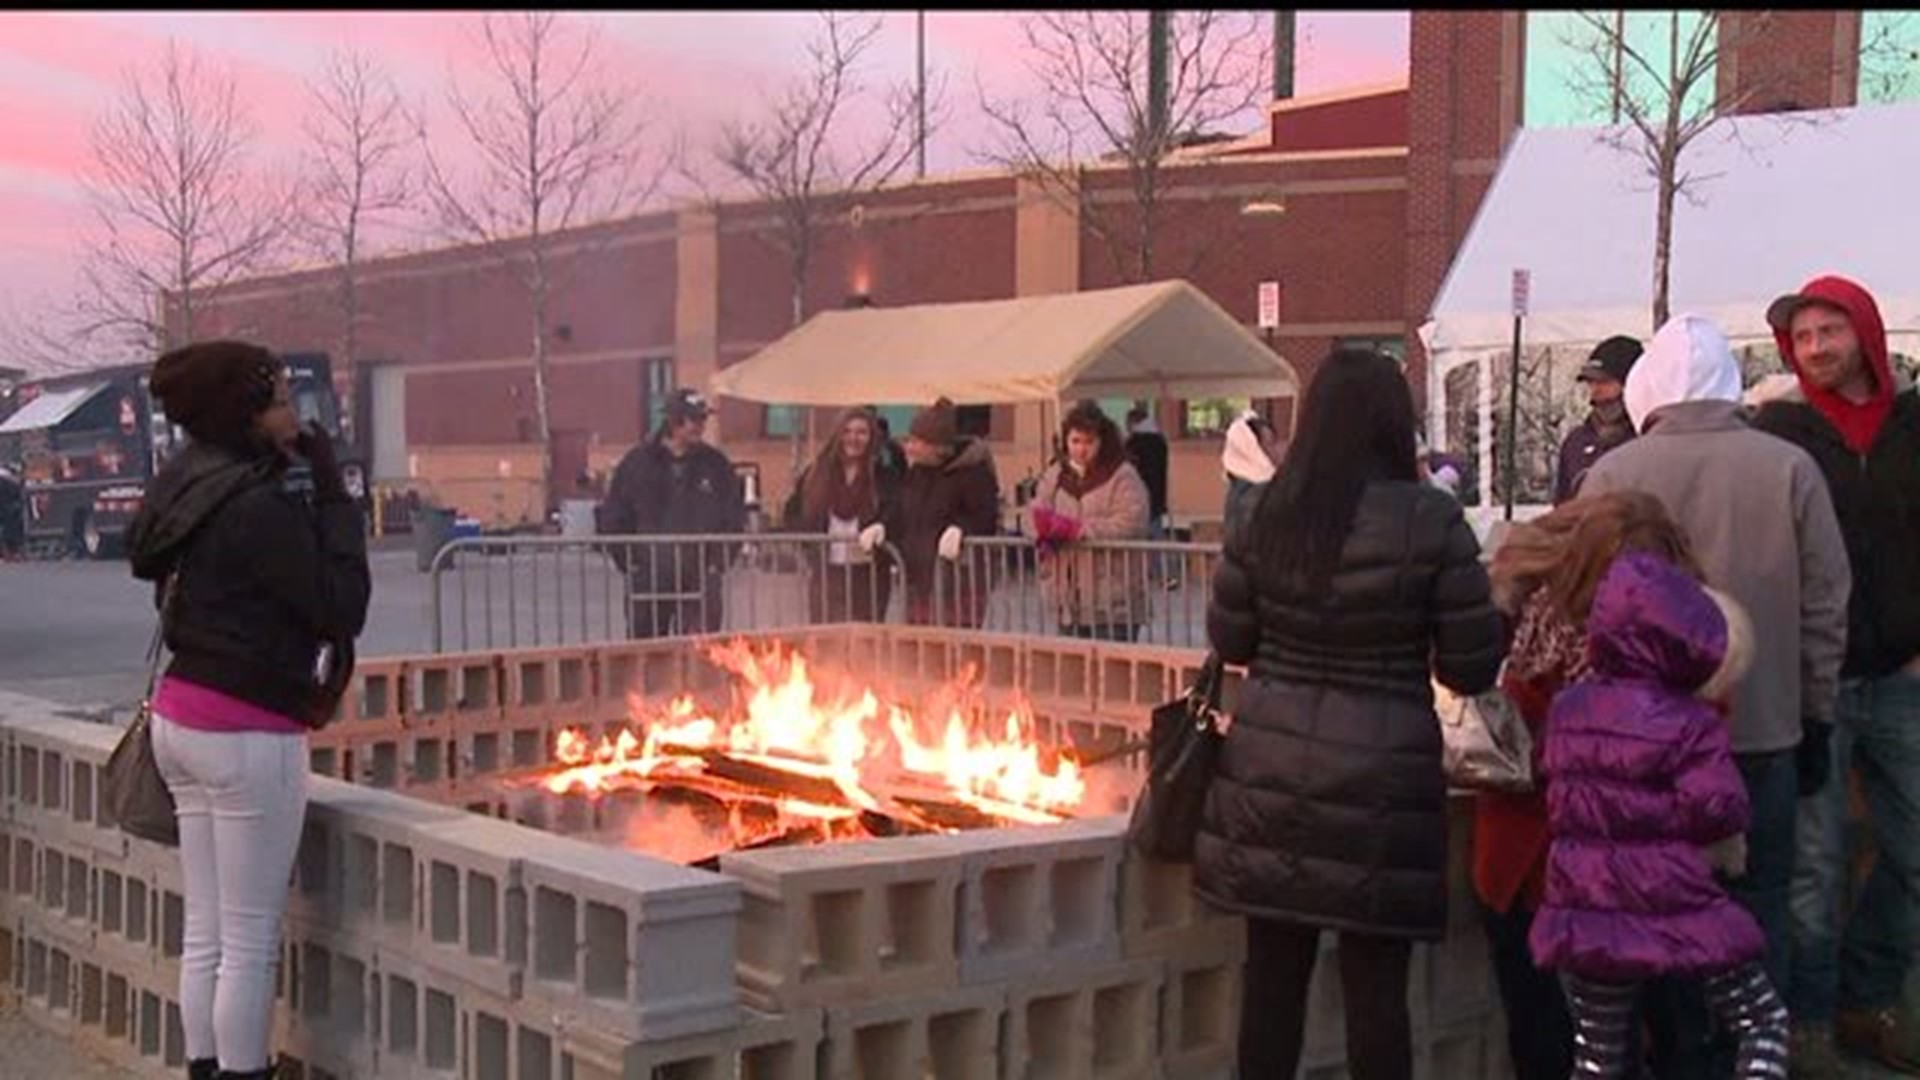 York Holds First Ice Festival